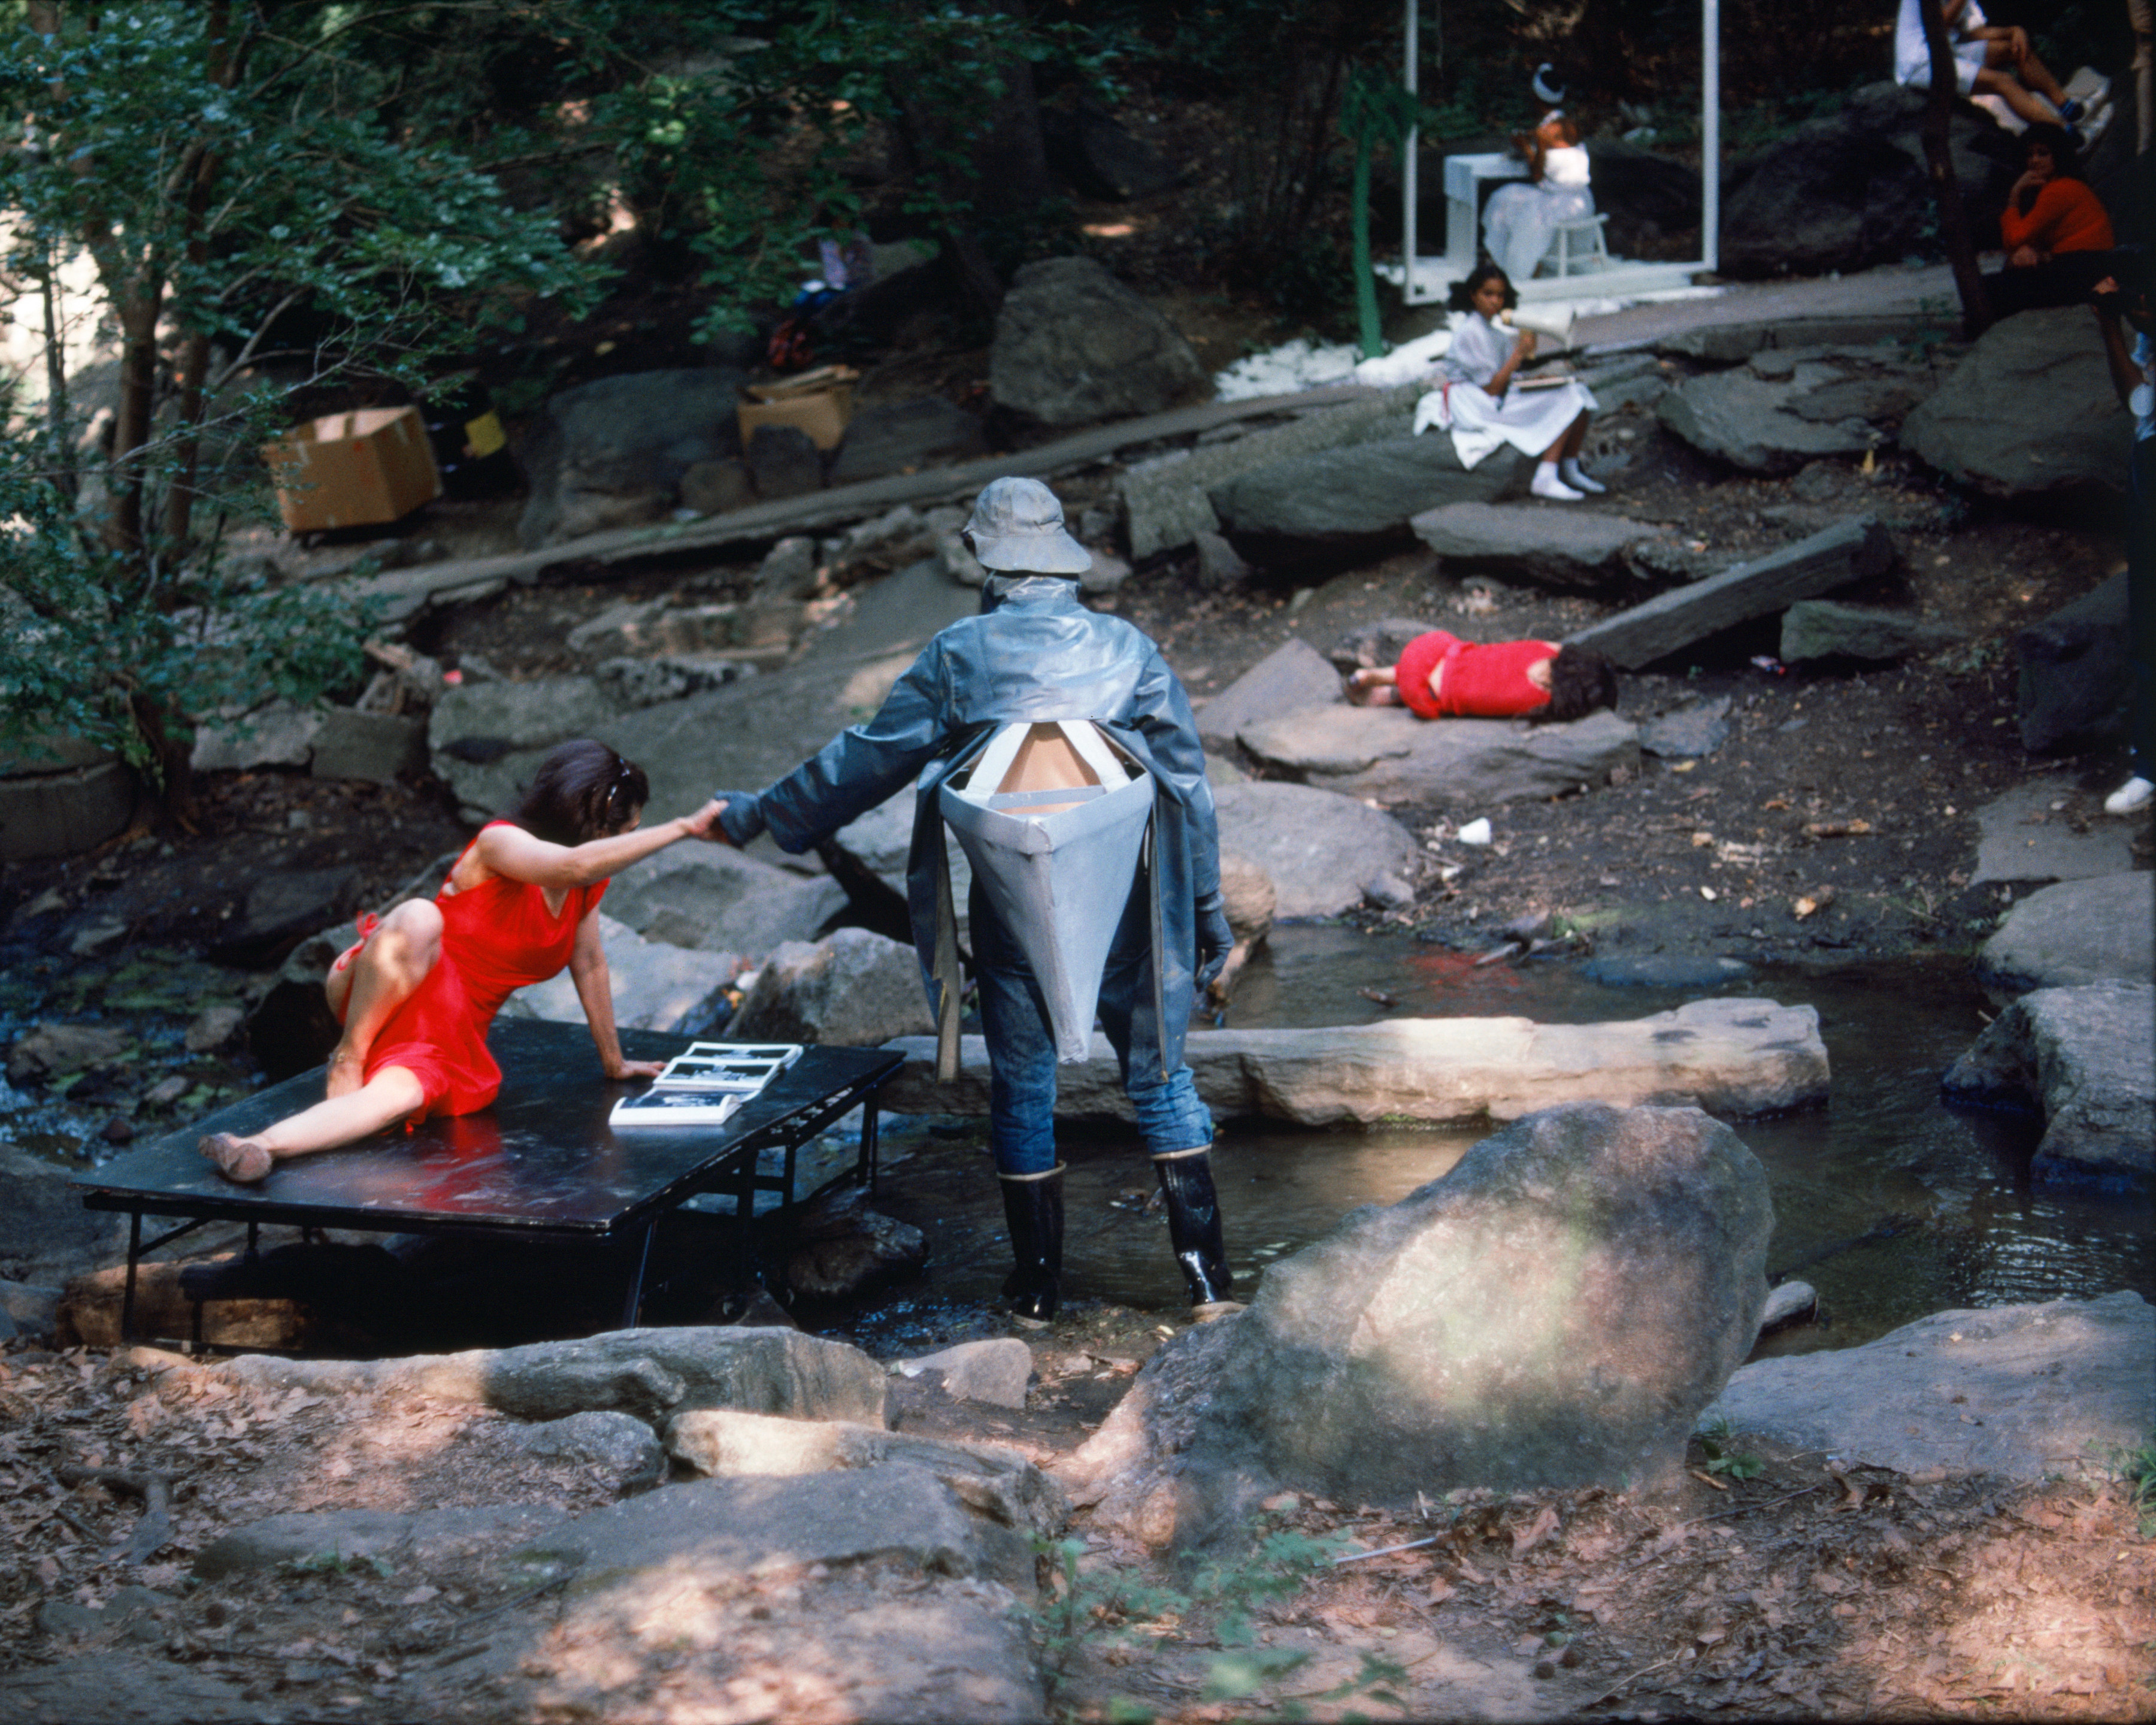 Rivers, First Draft: She is absorbed, but the Memorial insists, 1982/2015, Digital C-print from Kodachrome 35mm slides in 48 parts, 16h x 20w in (40.64h x 50.80w cm)